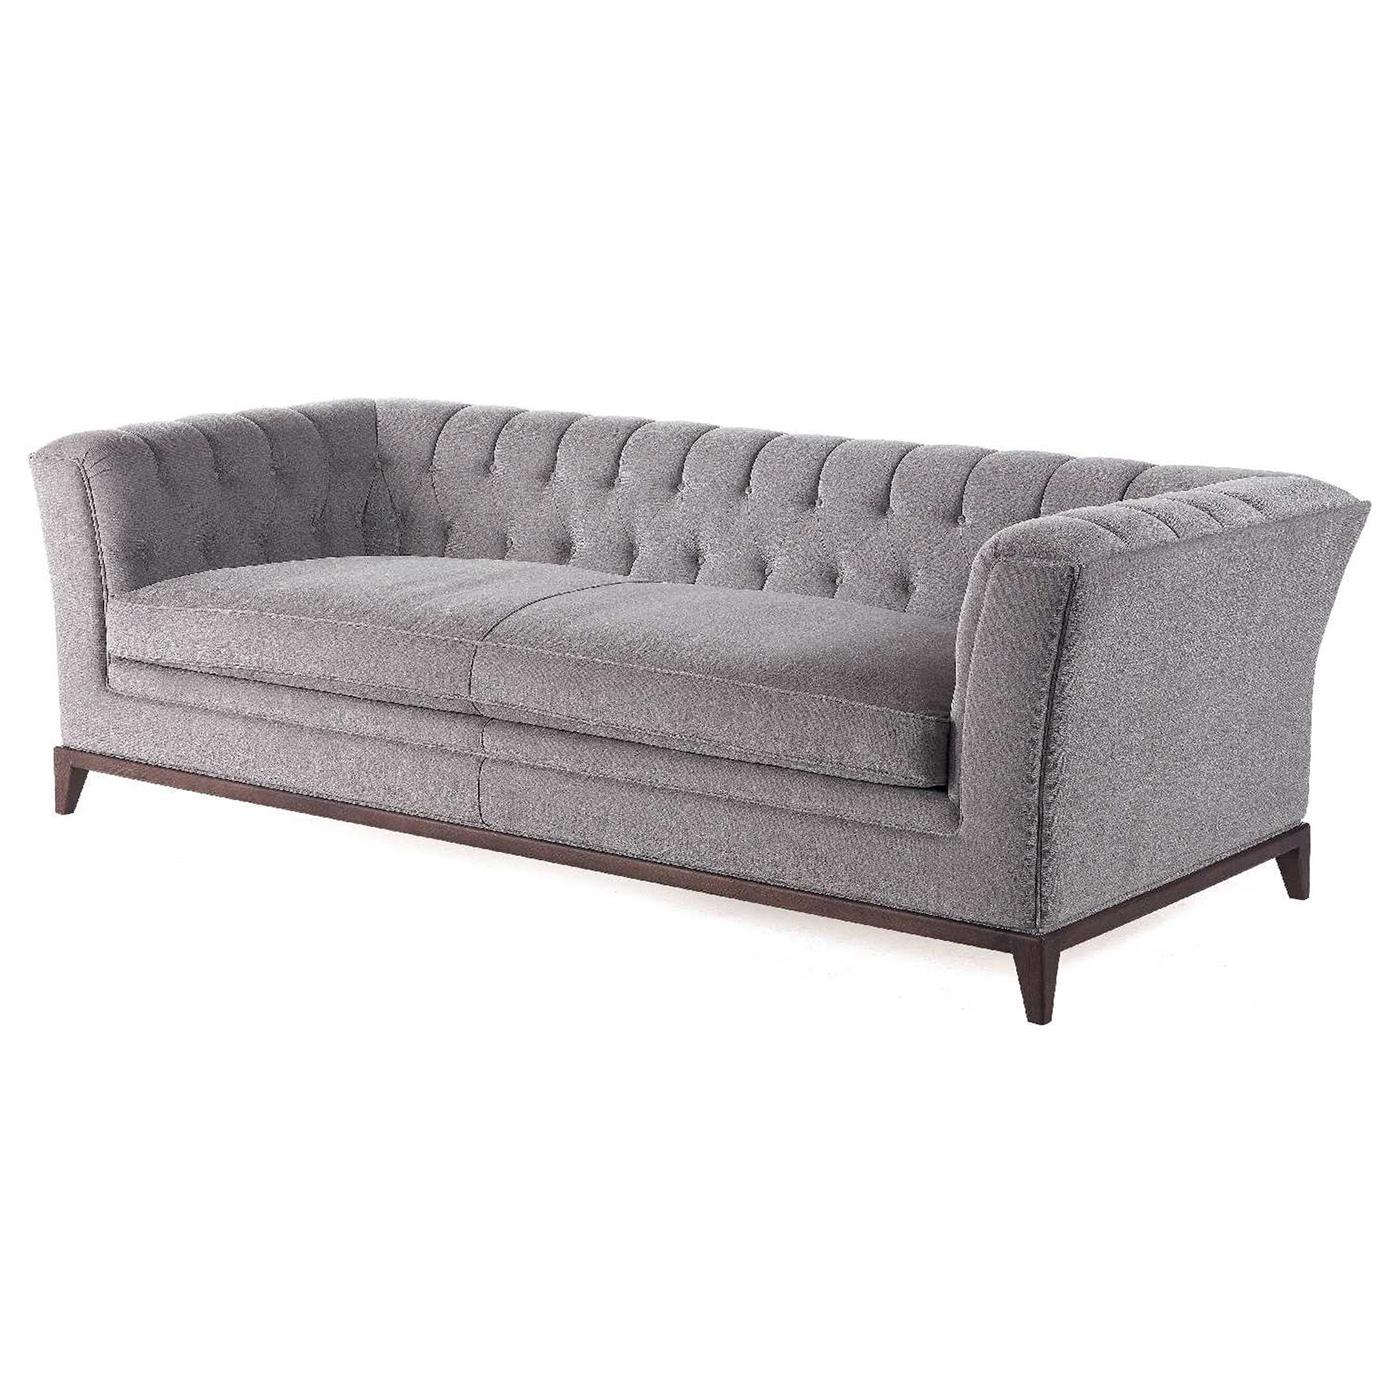 The tailored look of the Stark Sofa will add elegance in a modern living room or study offering sheltering comfort. Upholstered in light-gray fabric, the squared-off frame is detailed with a soft continuous button-tufted back and angled arms. The